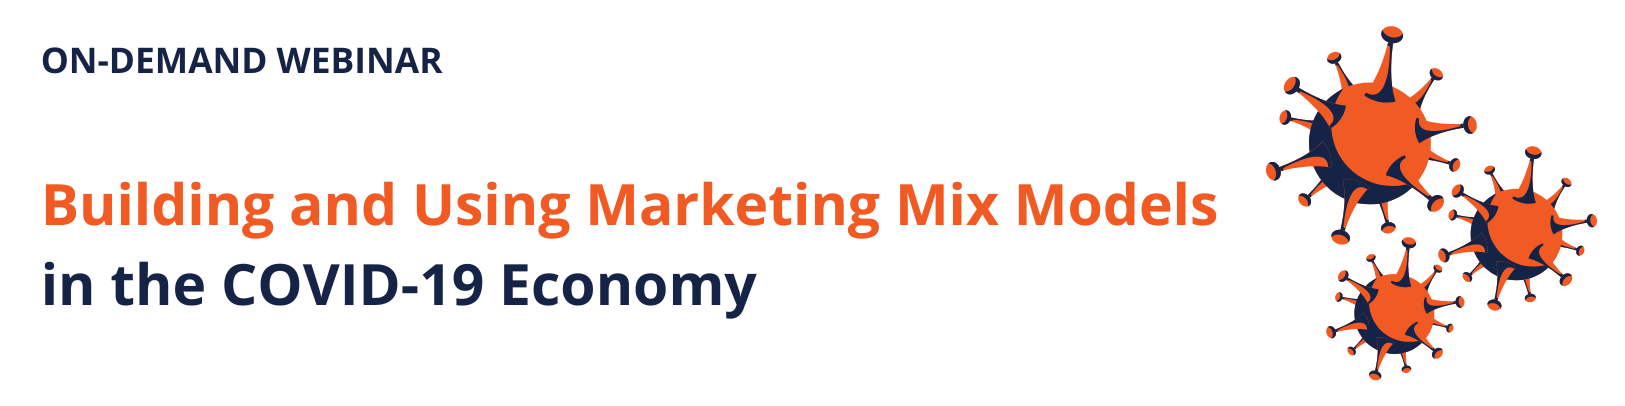 Building and Using Marketing Mix Models ​in the COVID-19 Economy​